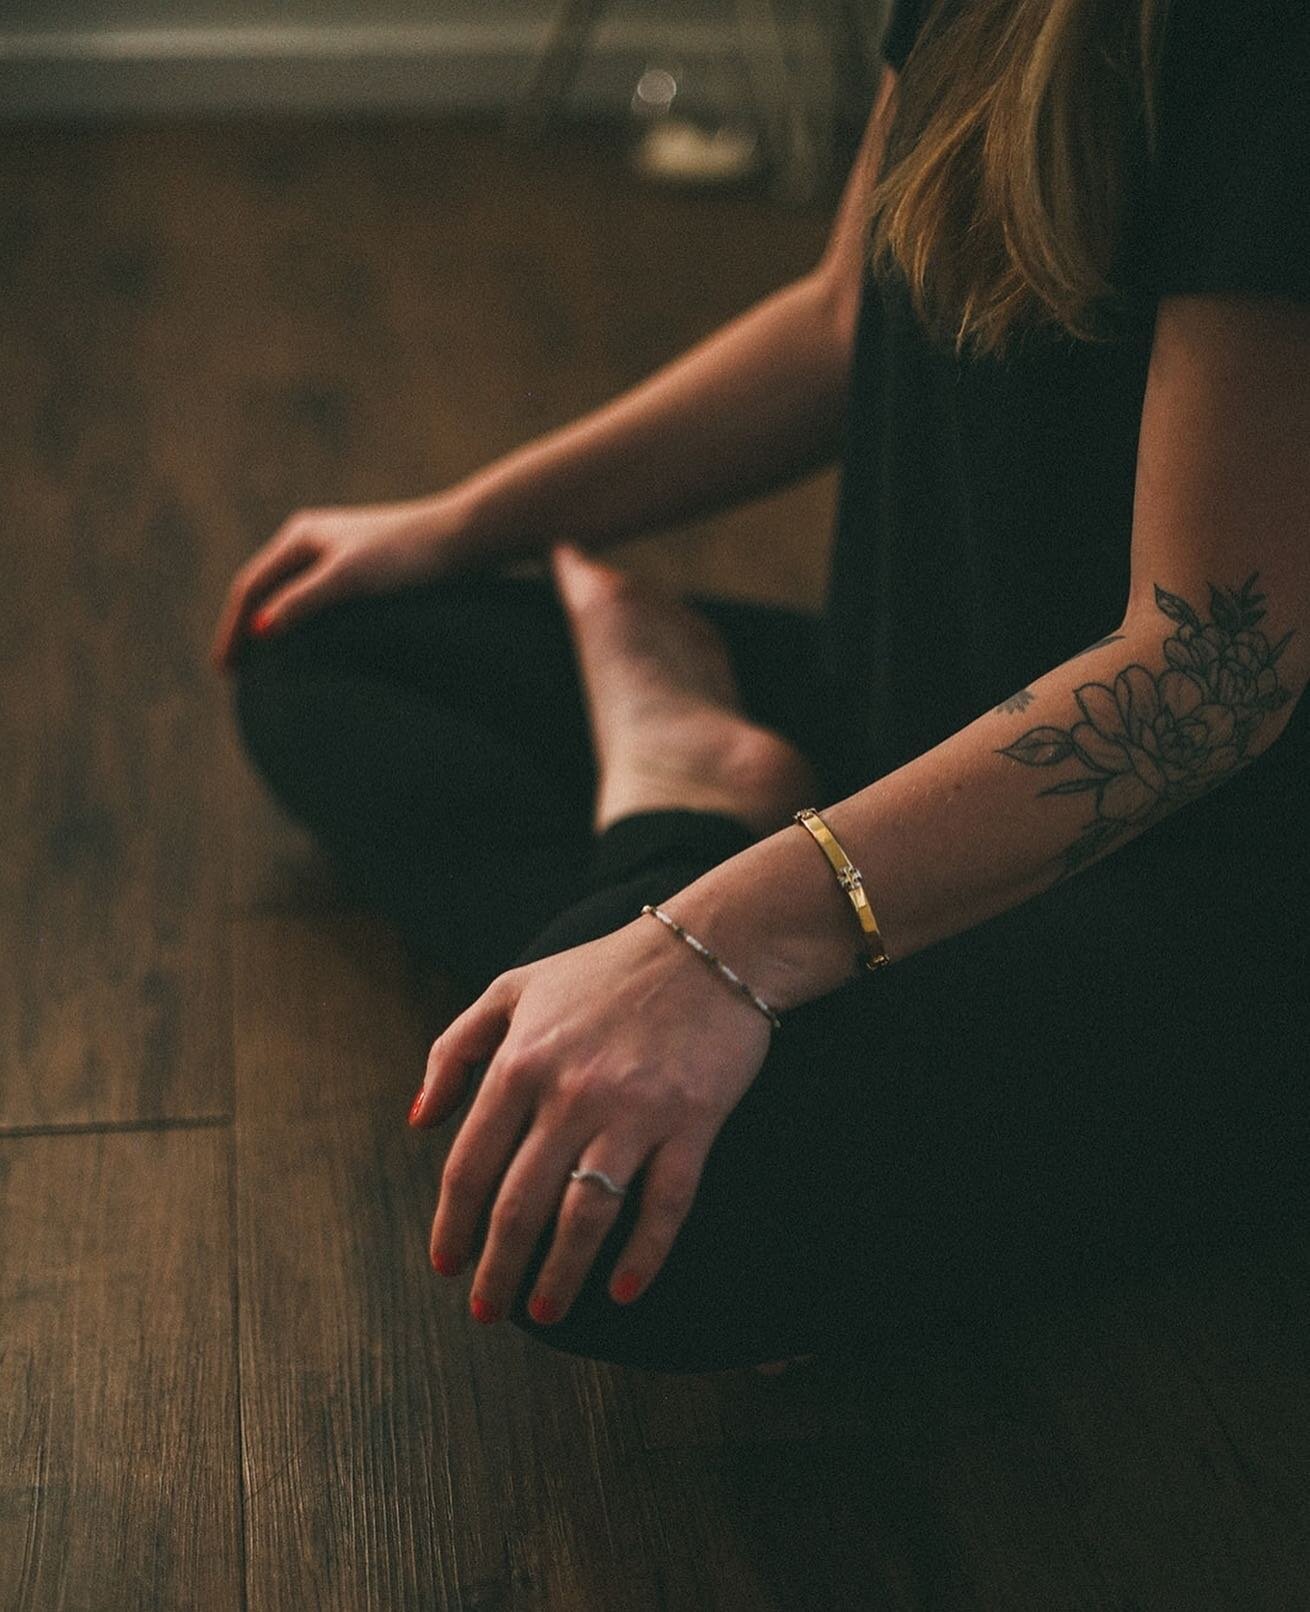 Struggling to settle into your meditation practice? Sara is ready to provide some guidance on how to get started during Guided Meditation Saturday, May 13 from 12:30-1:15pm.⁠
⁠
This 45-minute afternoon session is class pass eligible and perfect for a